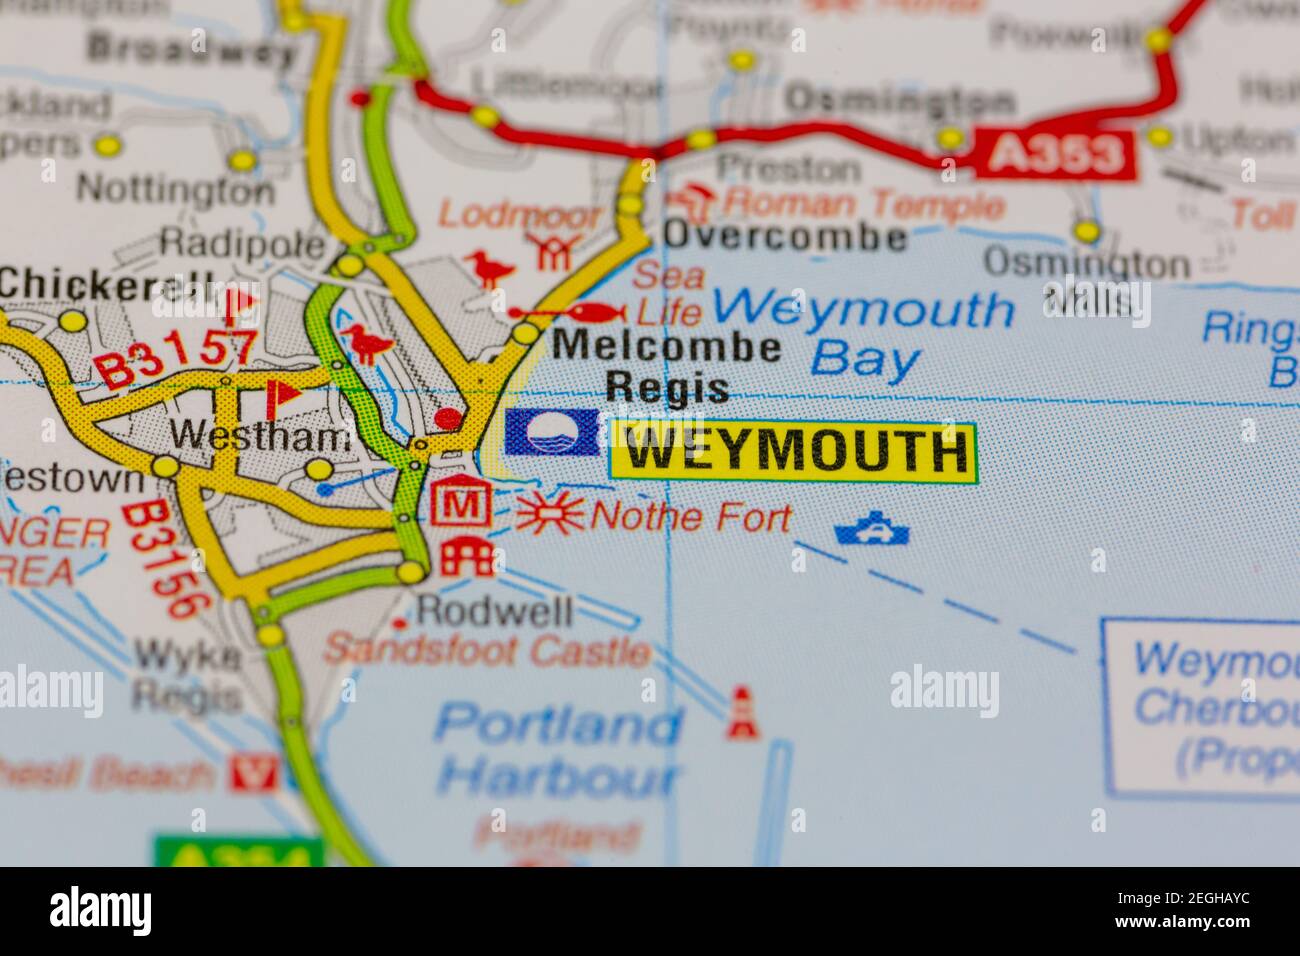 Weymouth And Surrounding Areas Shown On A Road Map Or Geography Map 2EGHAYC 